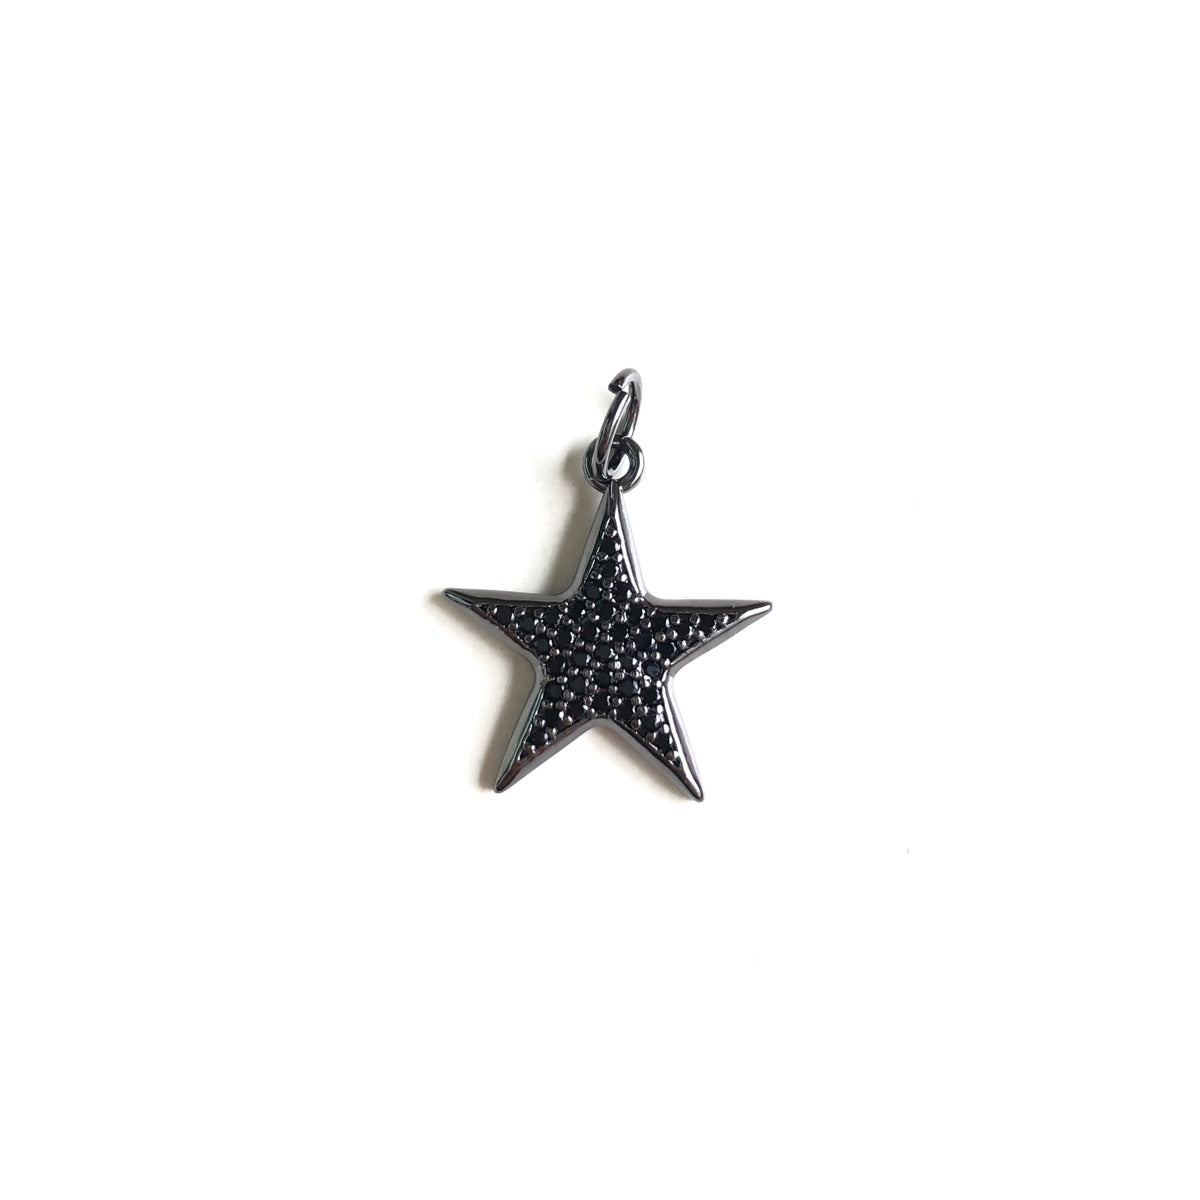 10pcs/lot 18.6*17mm Small Size CZ Paved Star Charms Black on Black CZ Paved Charms New Charms Arrivals Small Sizes Sun Moon Stars Charms Beads Beyond